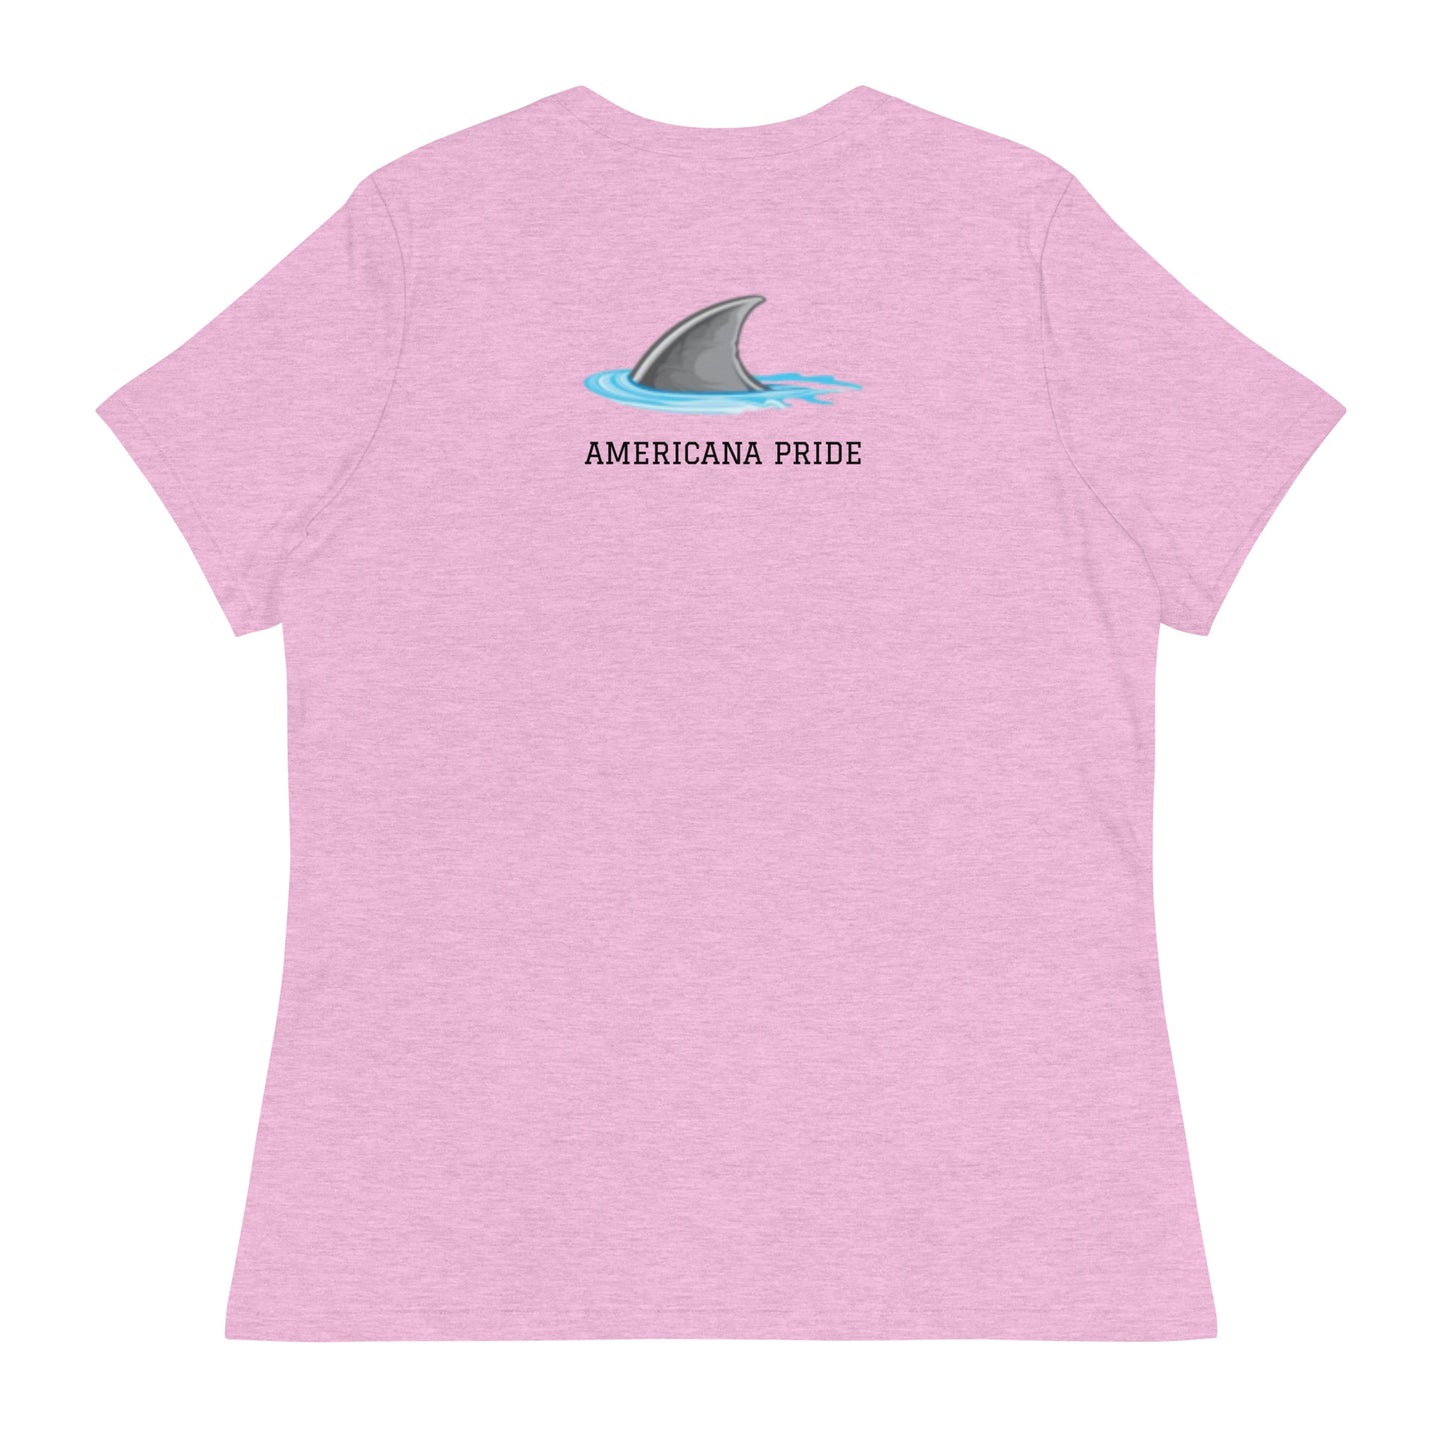 Are you the SHARK or the minnow?  women's tee (black lettering)